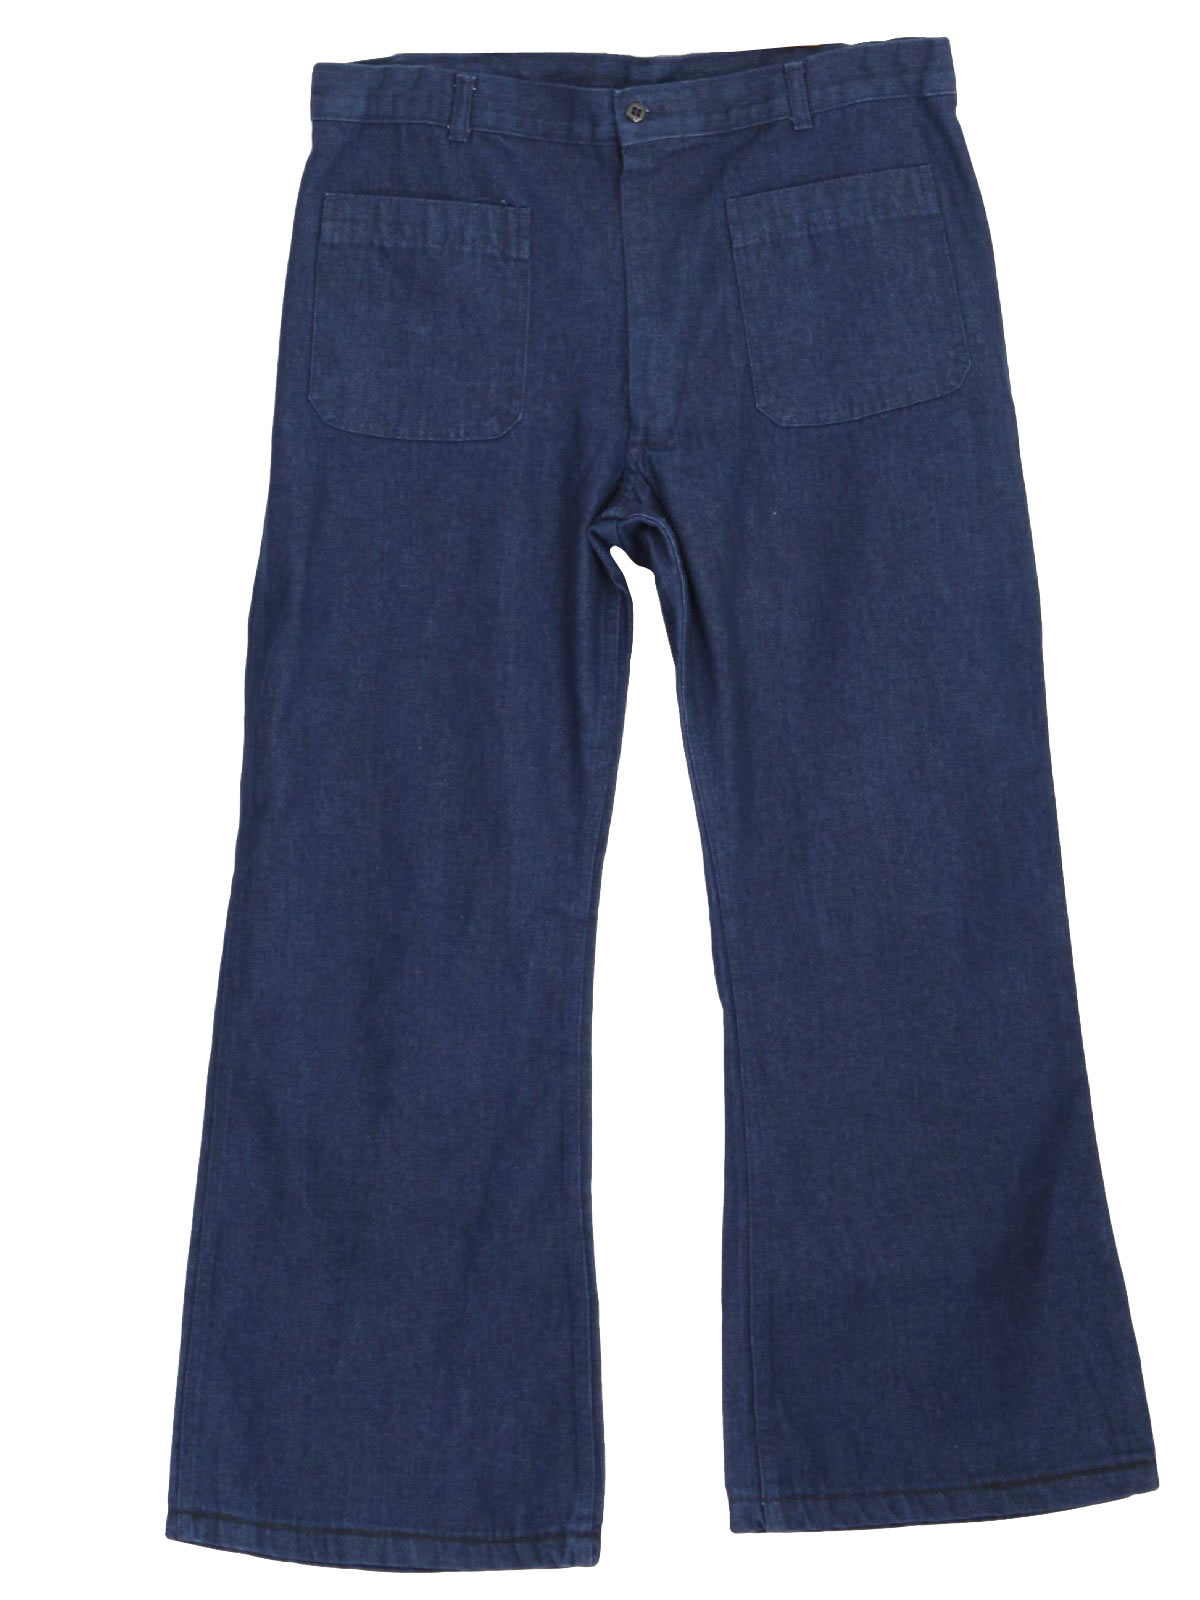 1960's Vintage Utility Trousers Bellbottom Pants: 60s -Utility Trousers ...